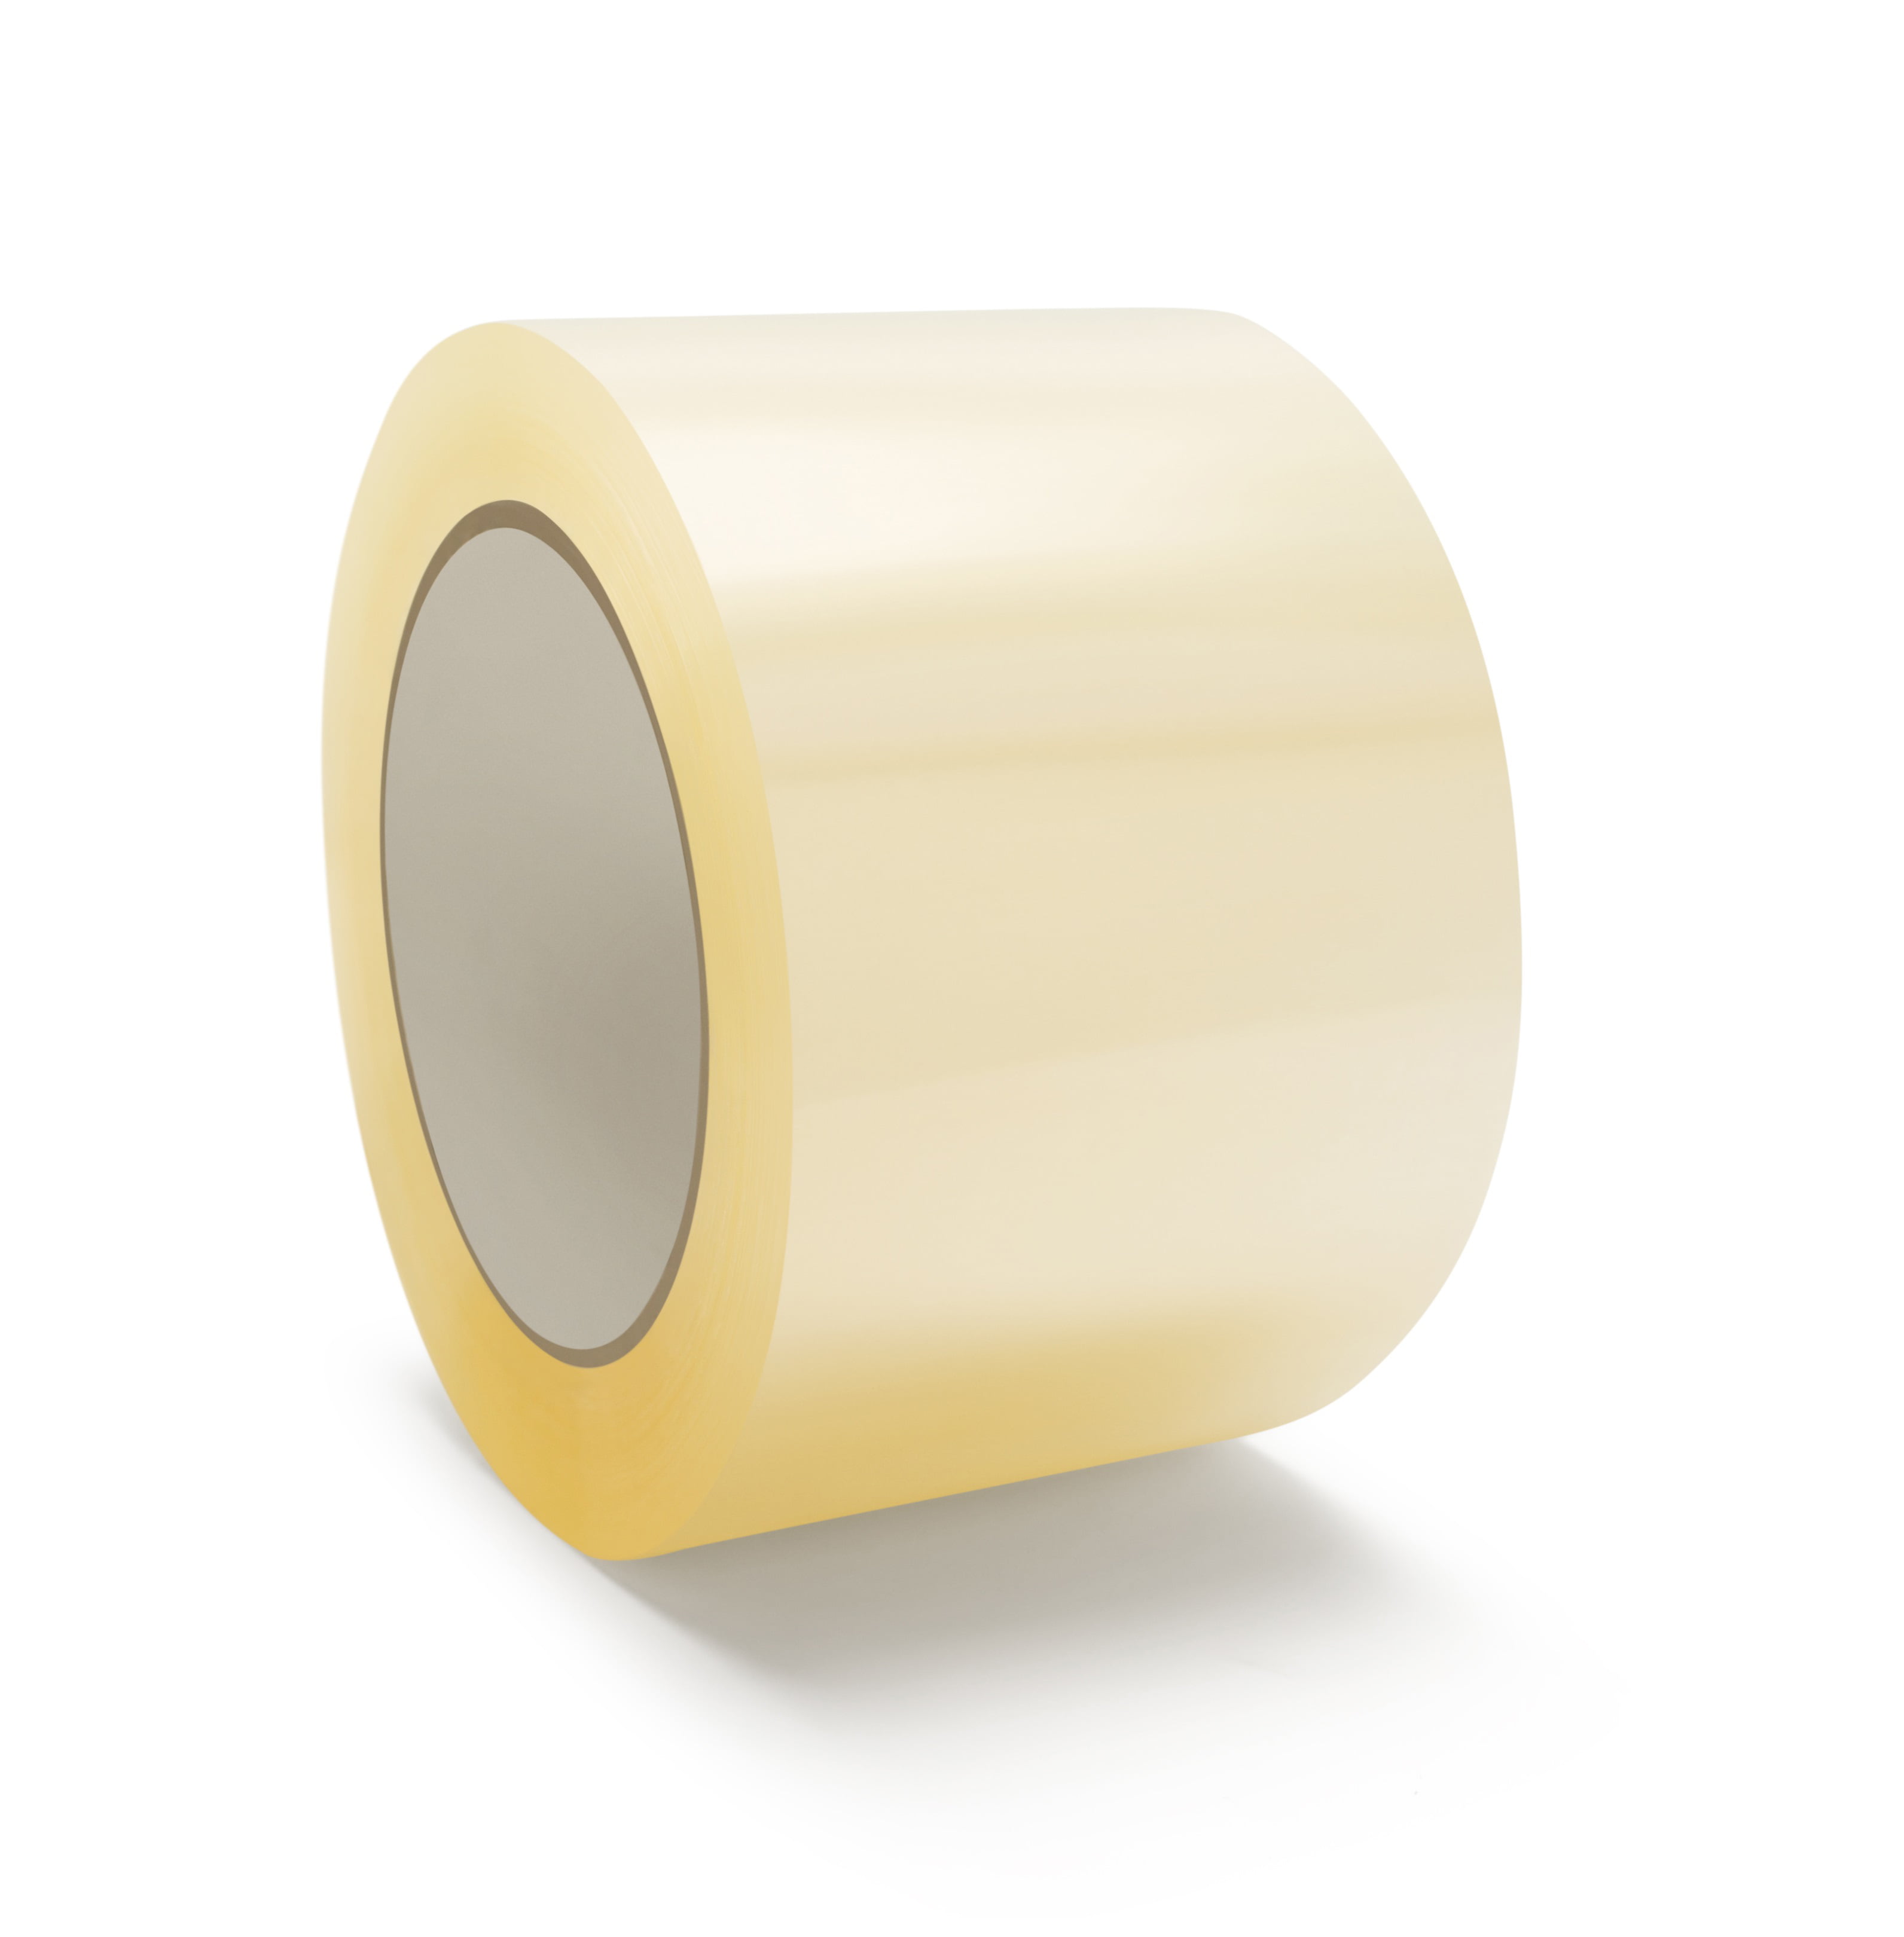 Clear Carton Sealing Packing Package Tape 330' 24 Rolls 3"x110 Yds 